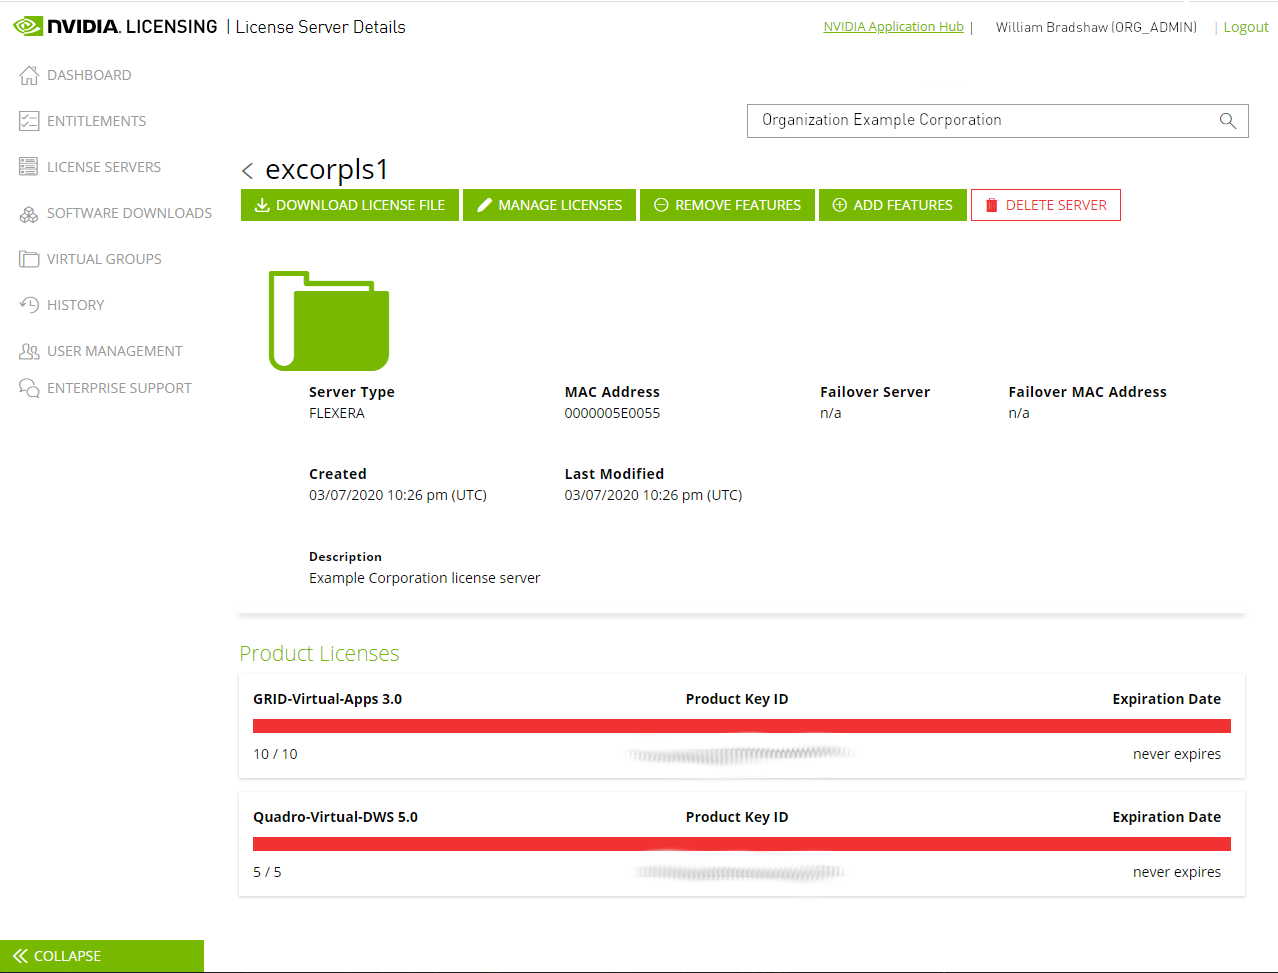 Screen capture showing the License Server Details page on the NVIDIA Licensing Portal.